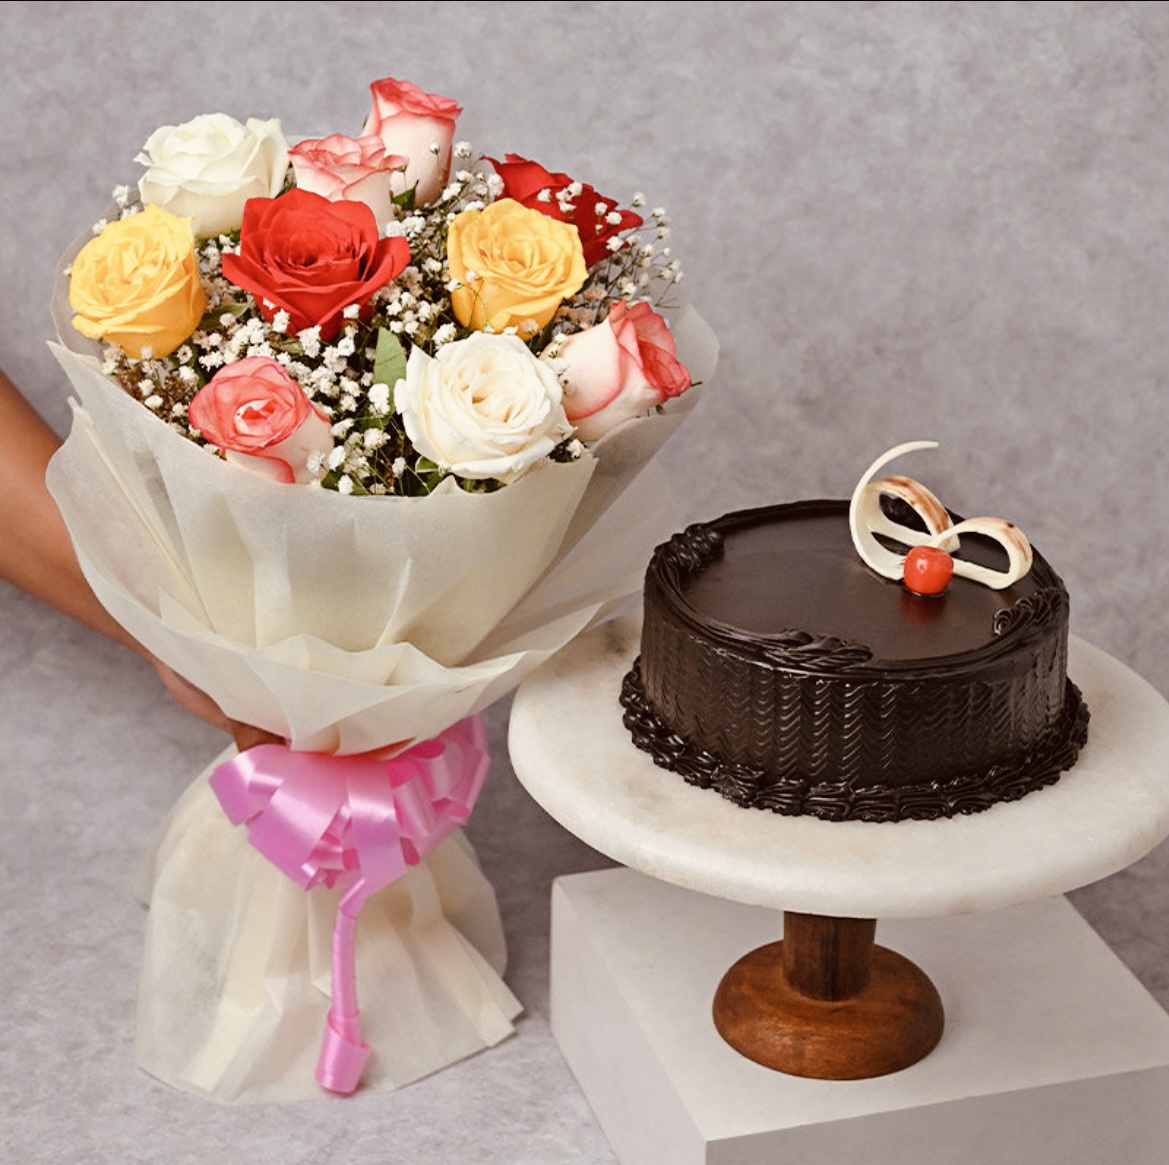 Online flowers and cakes combo online delivery India -Presto '